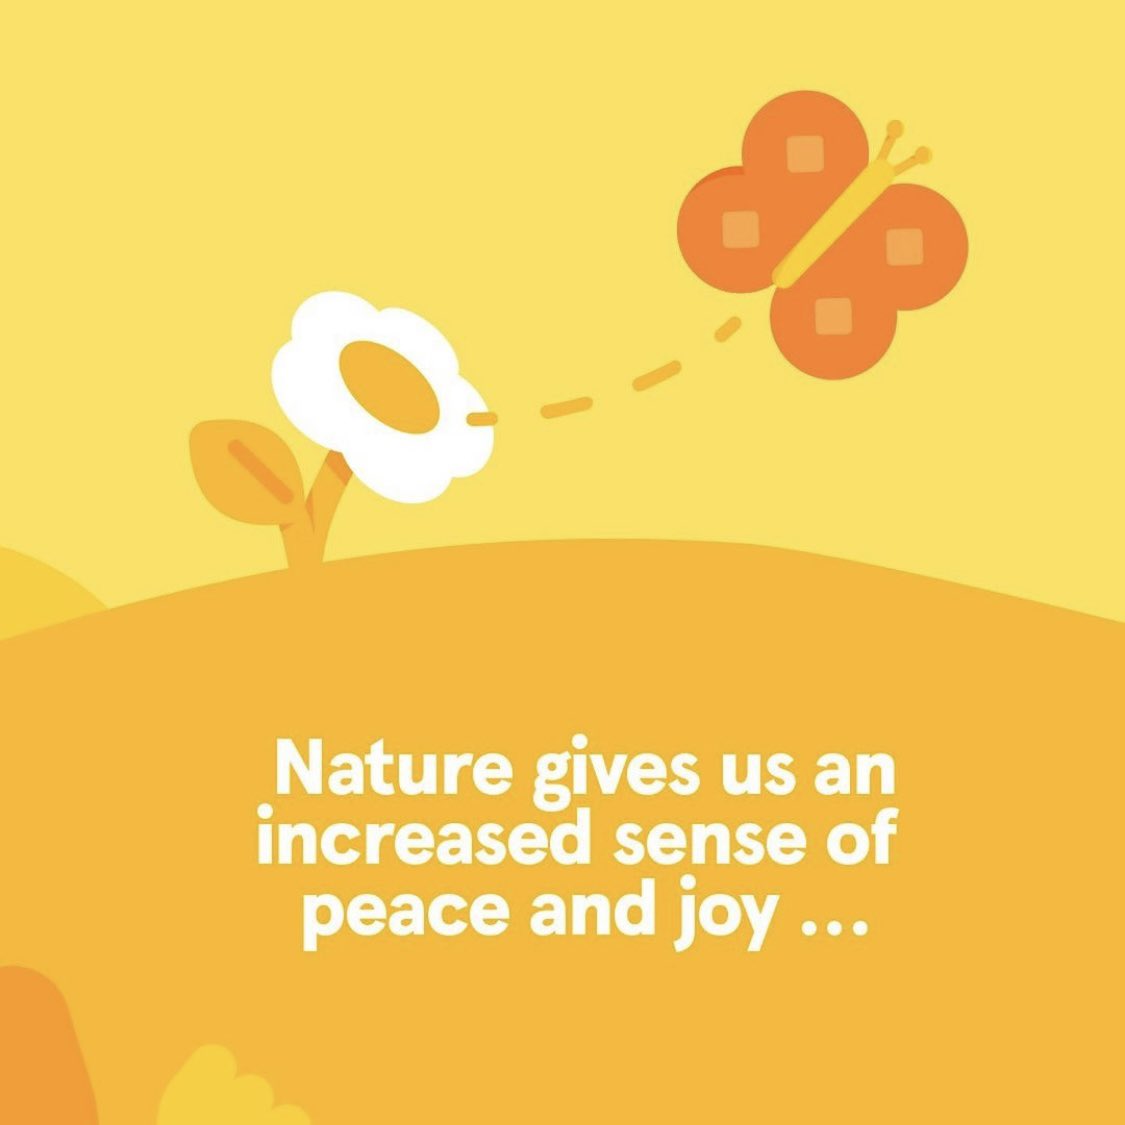 Time in nature can bring an increased sense of peace and joy 🌼🦋 Image: @Headspace